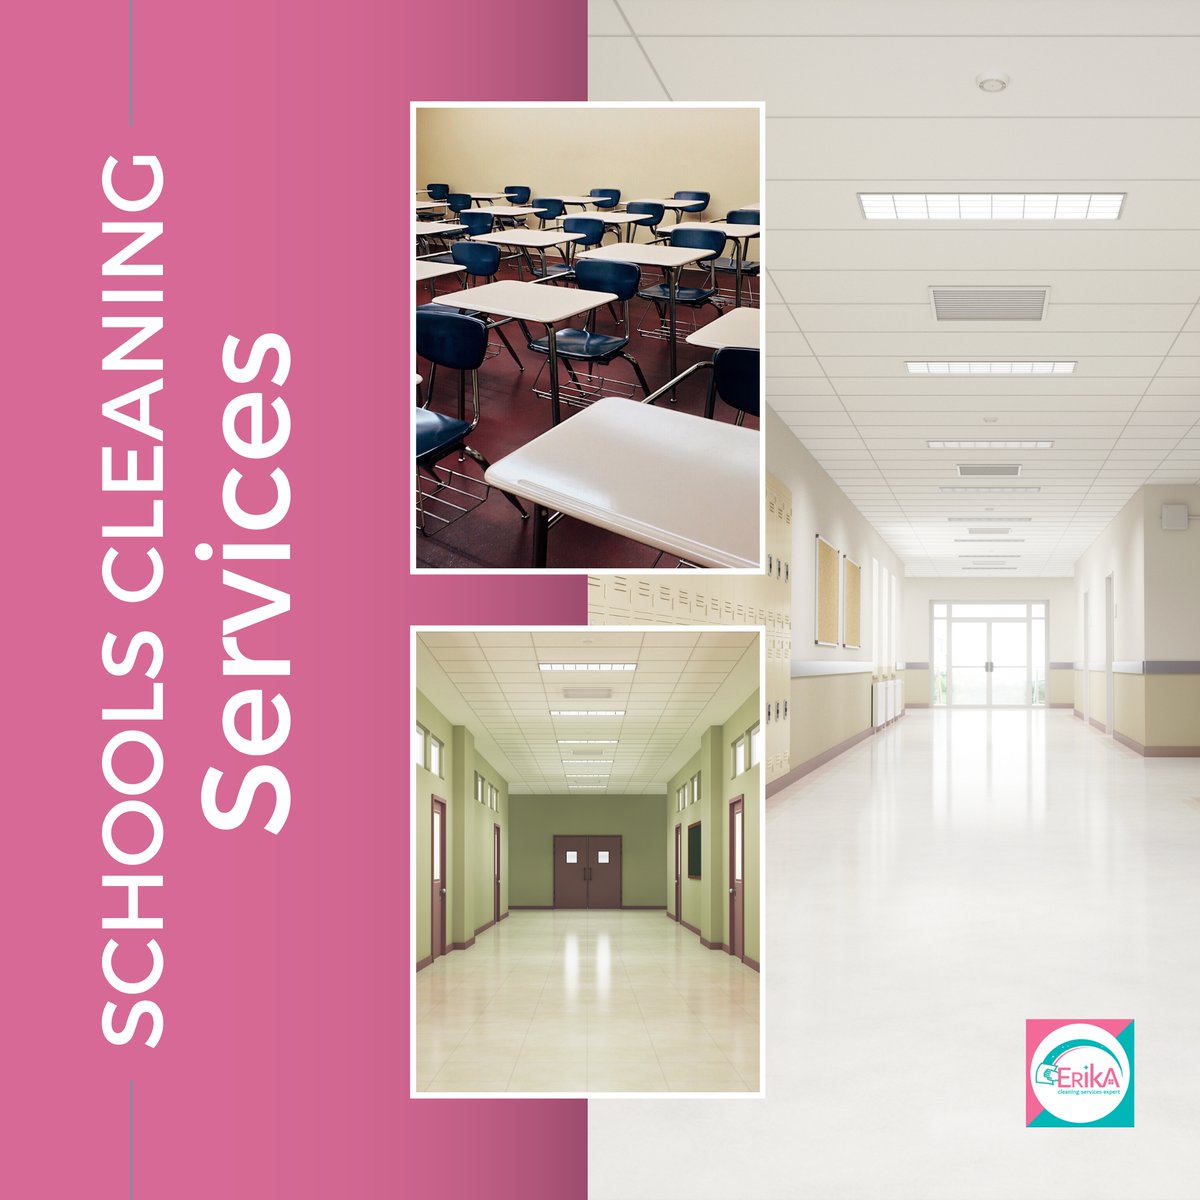 Do you need a fresh start for your school? 🏫Let Erika's Cleaning Services take care of it. With meticulous attention, we transform spaces into impeccable ones. Call today for a free quote. #SchoolCleaning #HoustonServices #FreeQuote